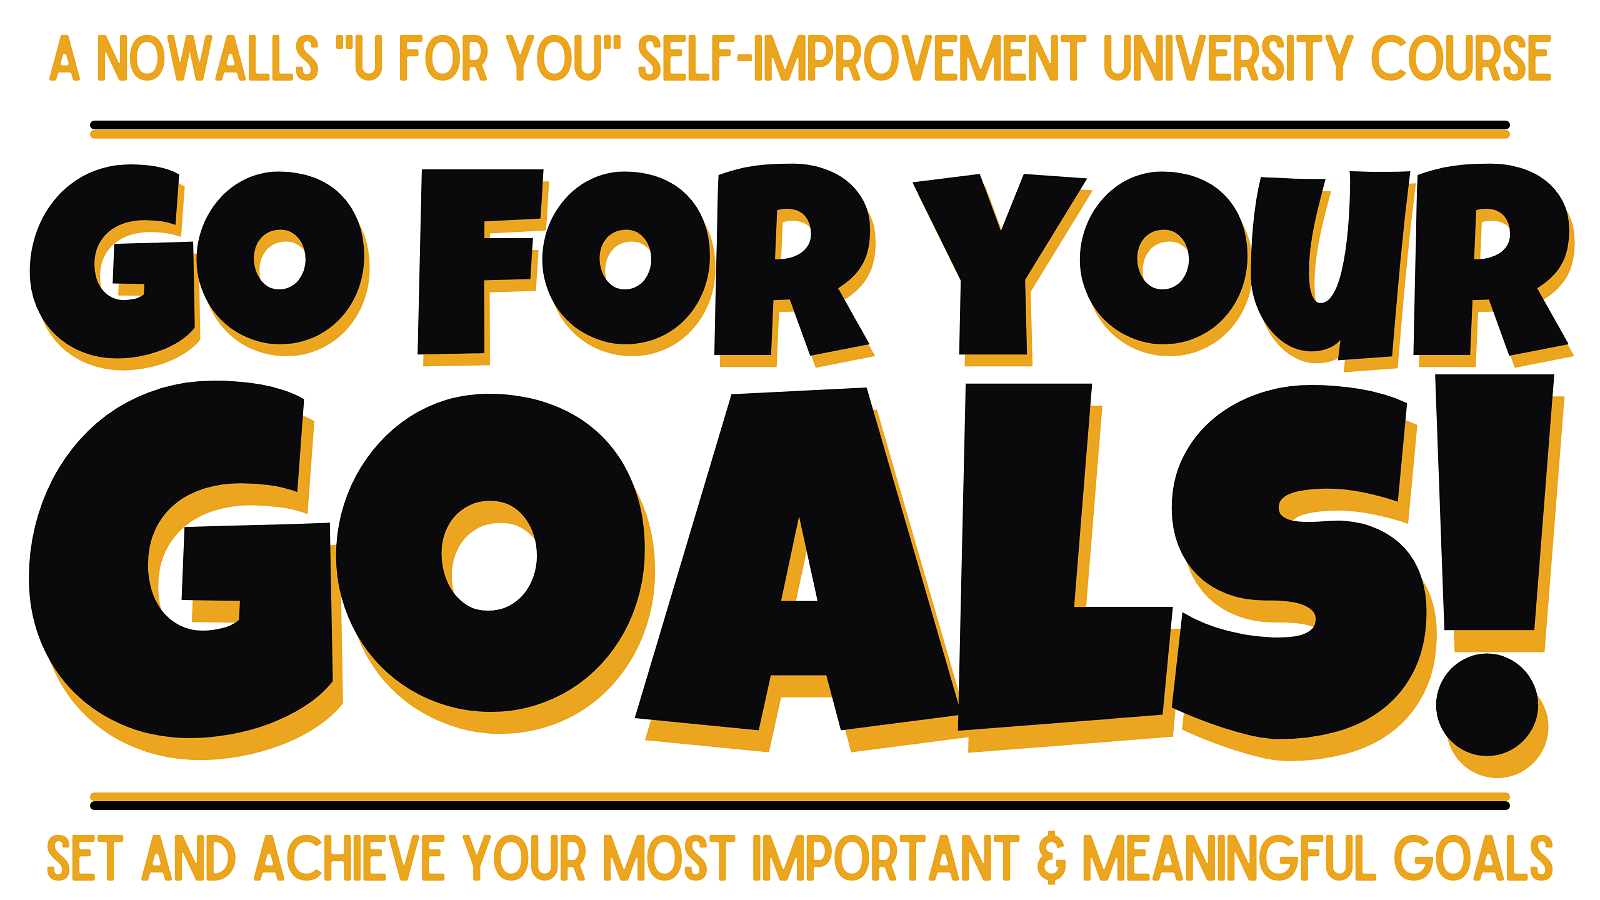 Go For Your Goals!